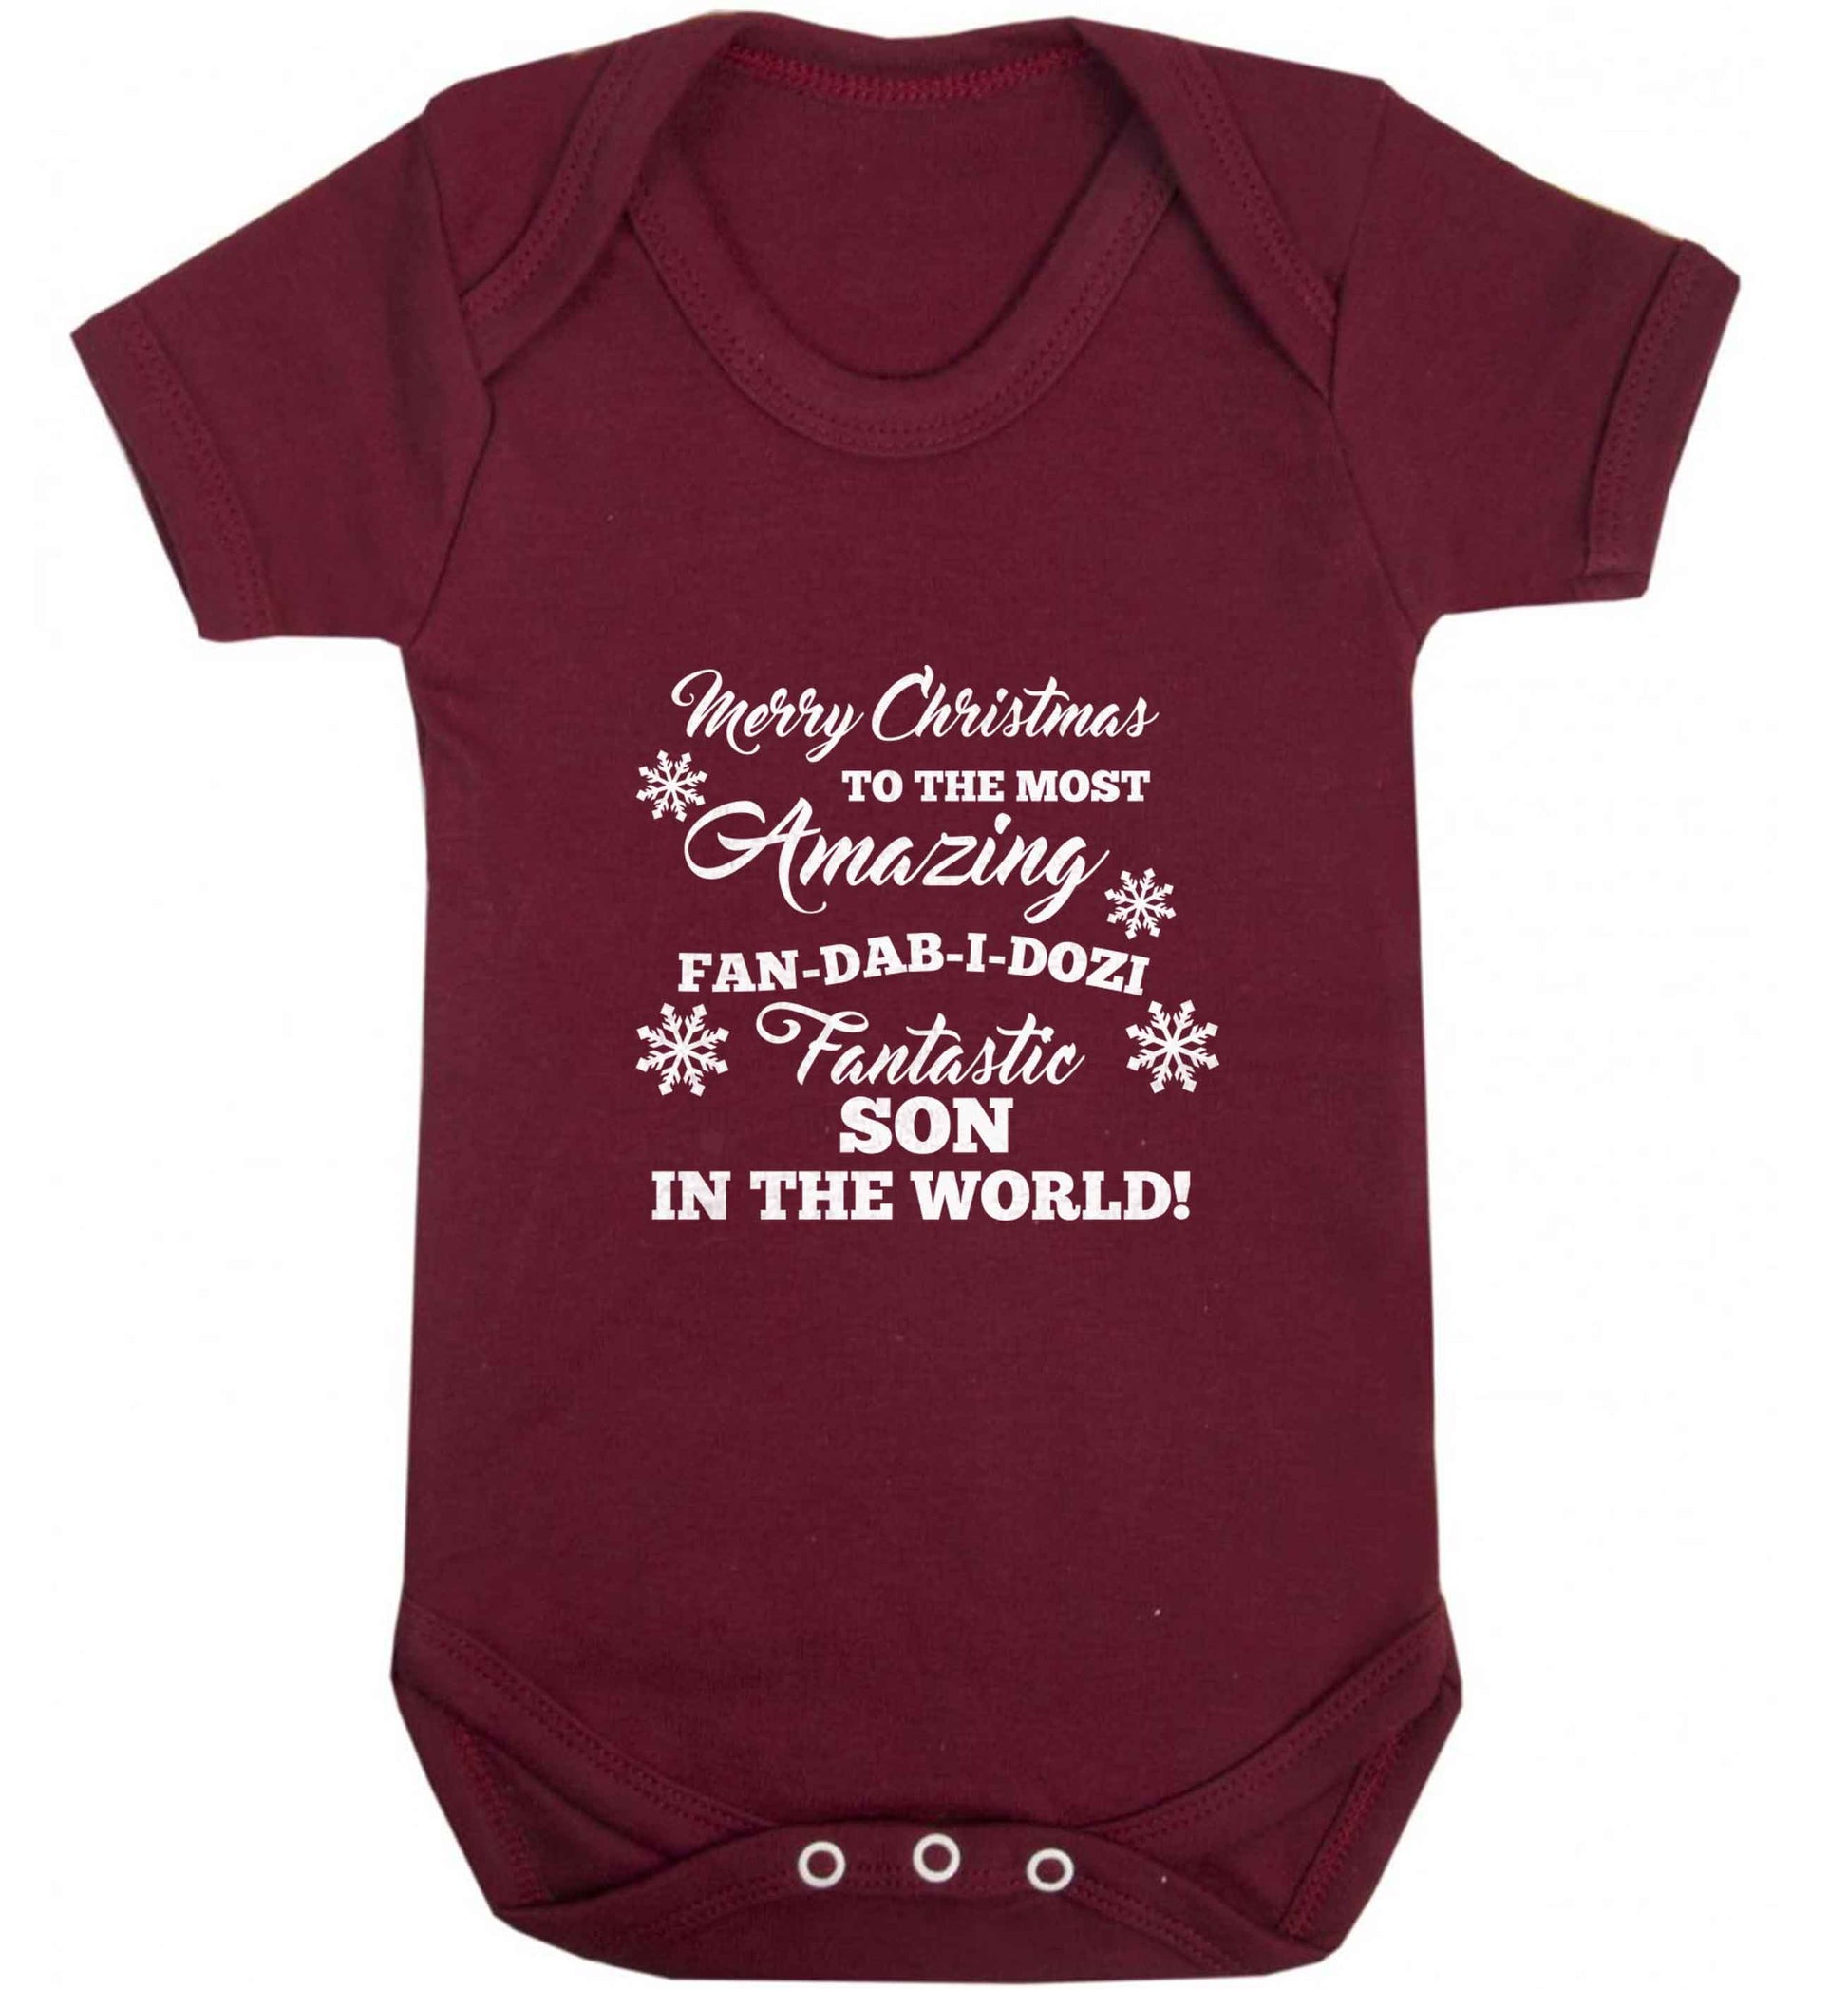 Merry Christmas to the most amazing fan-dab-i-dozi fantasic Son in the world baby vest maroon 18-24 months